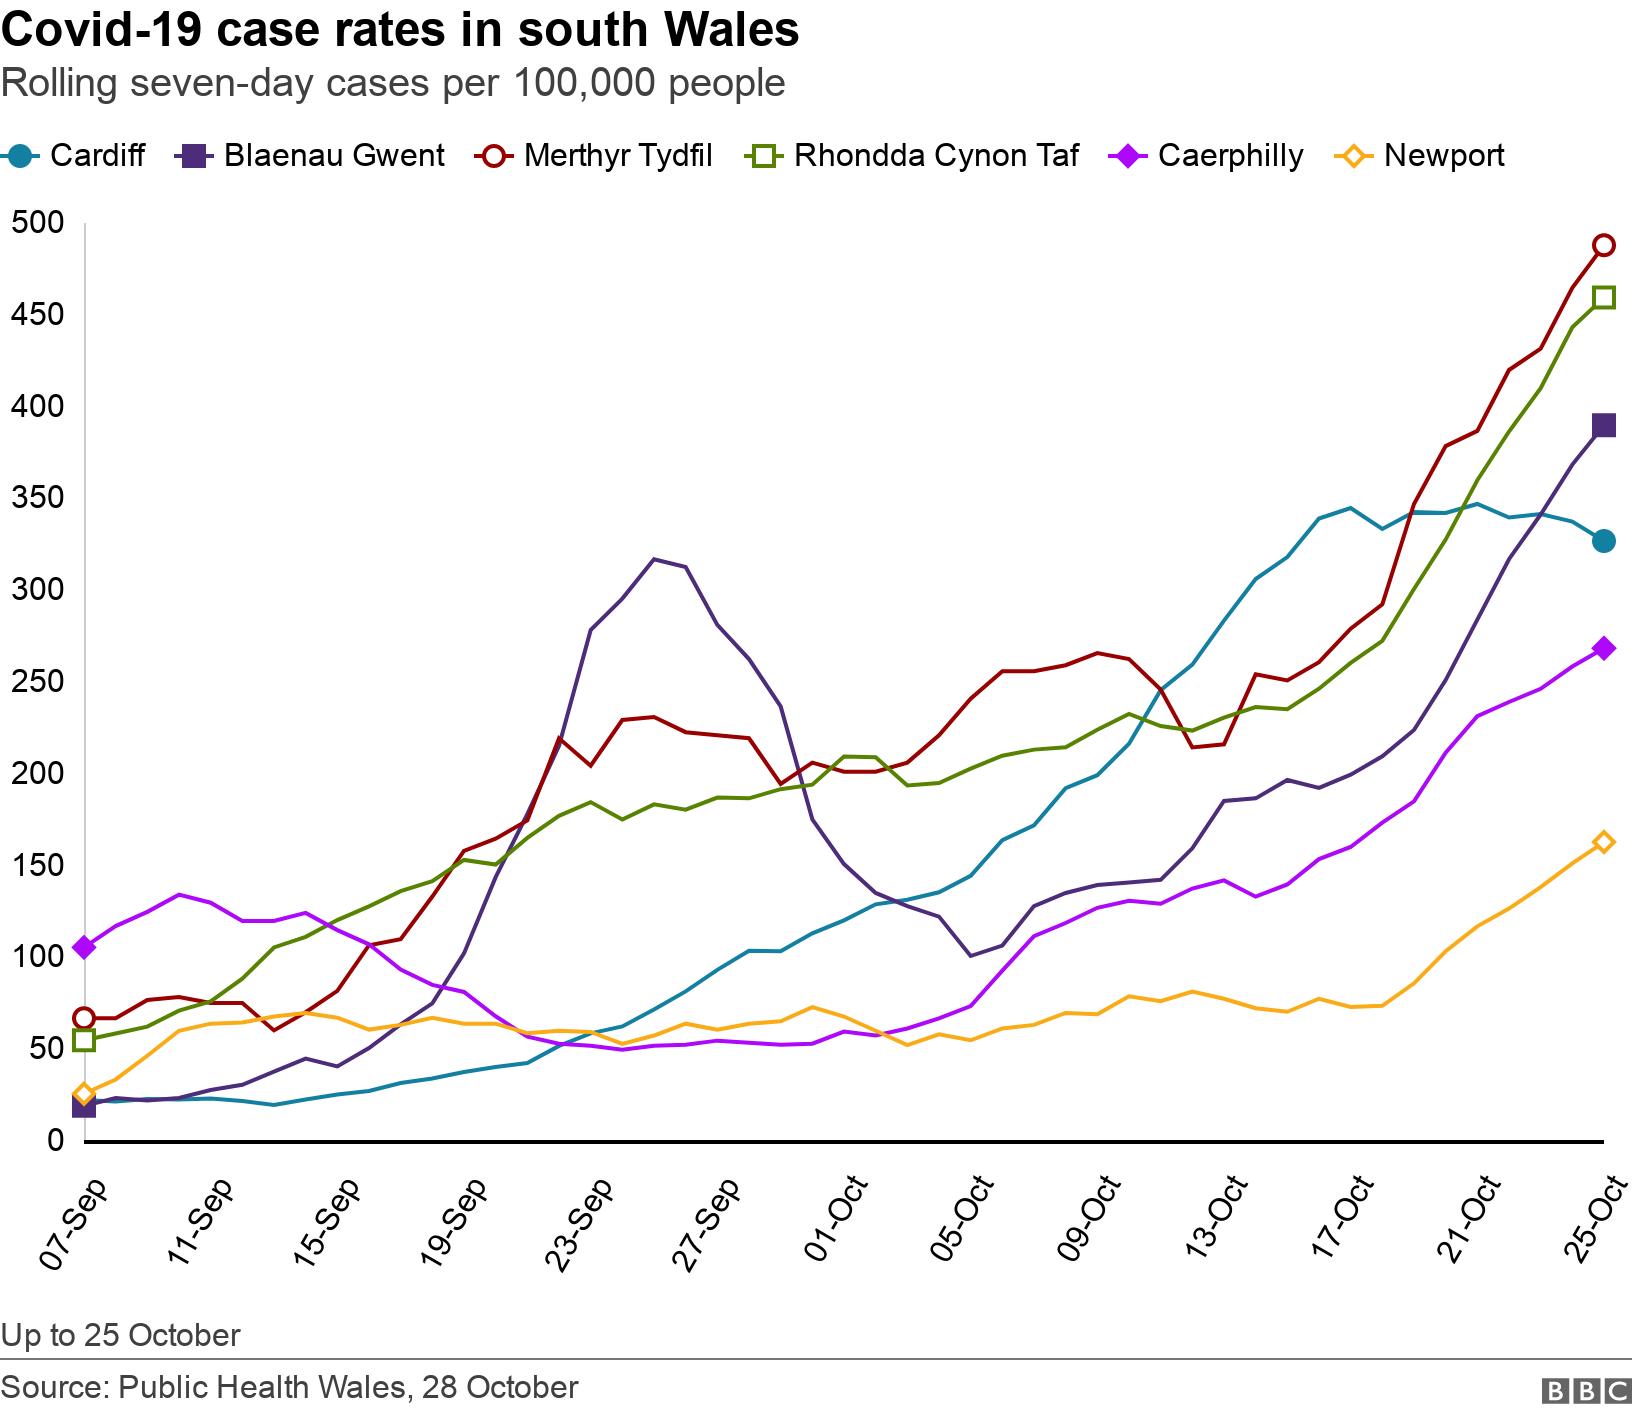 Covid-19 case rates in south Wales. Rolling seven-day cases per 100,000 people.  Up to 25 October.